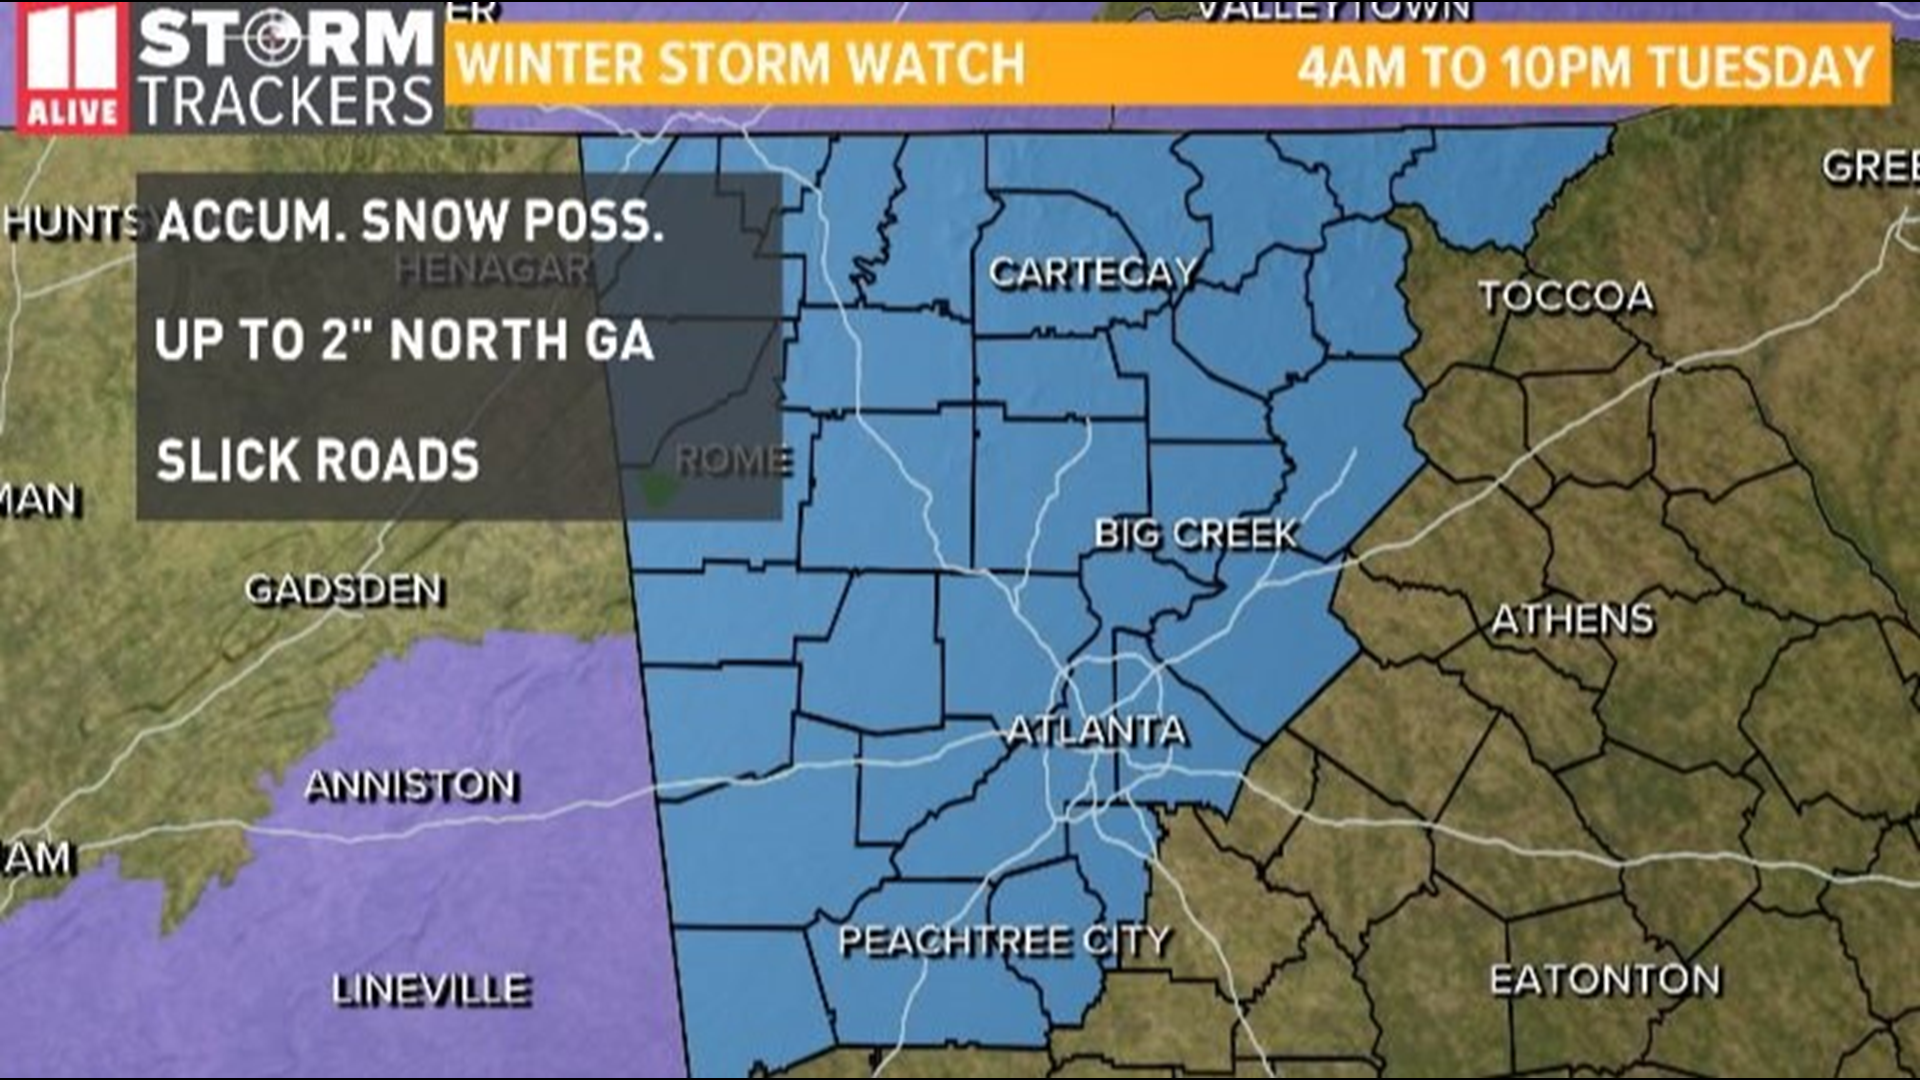 Winter Storm Watch means we could see accumulating snow in parts of our area. 1 to 2 inches  of snow possible.